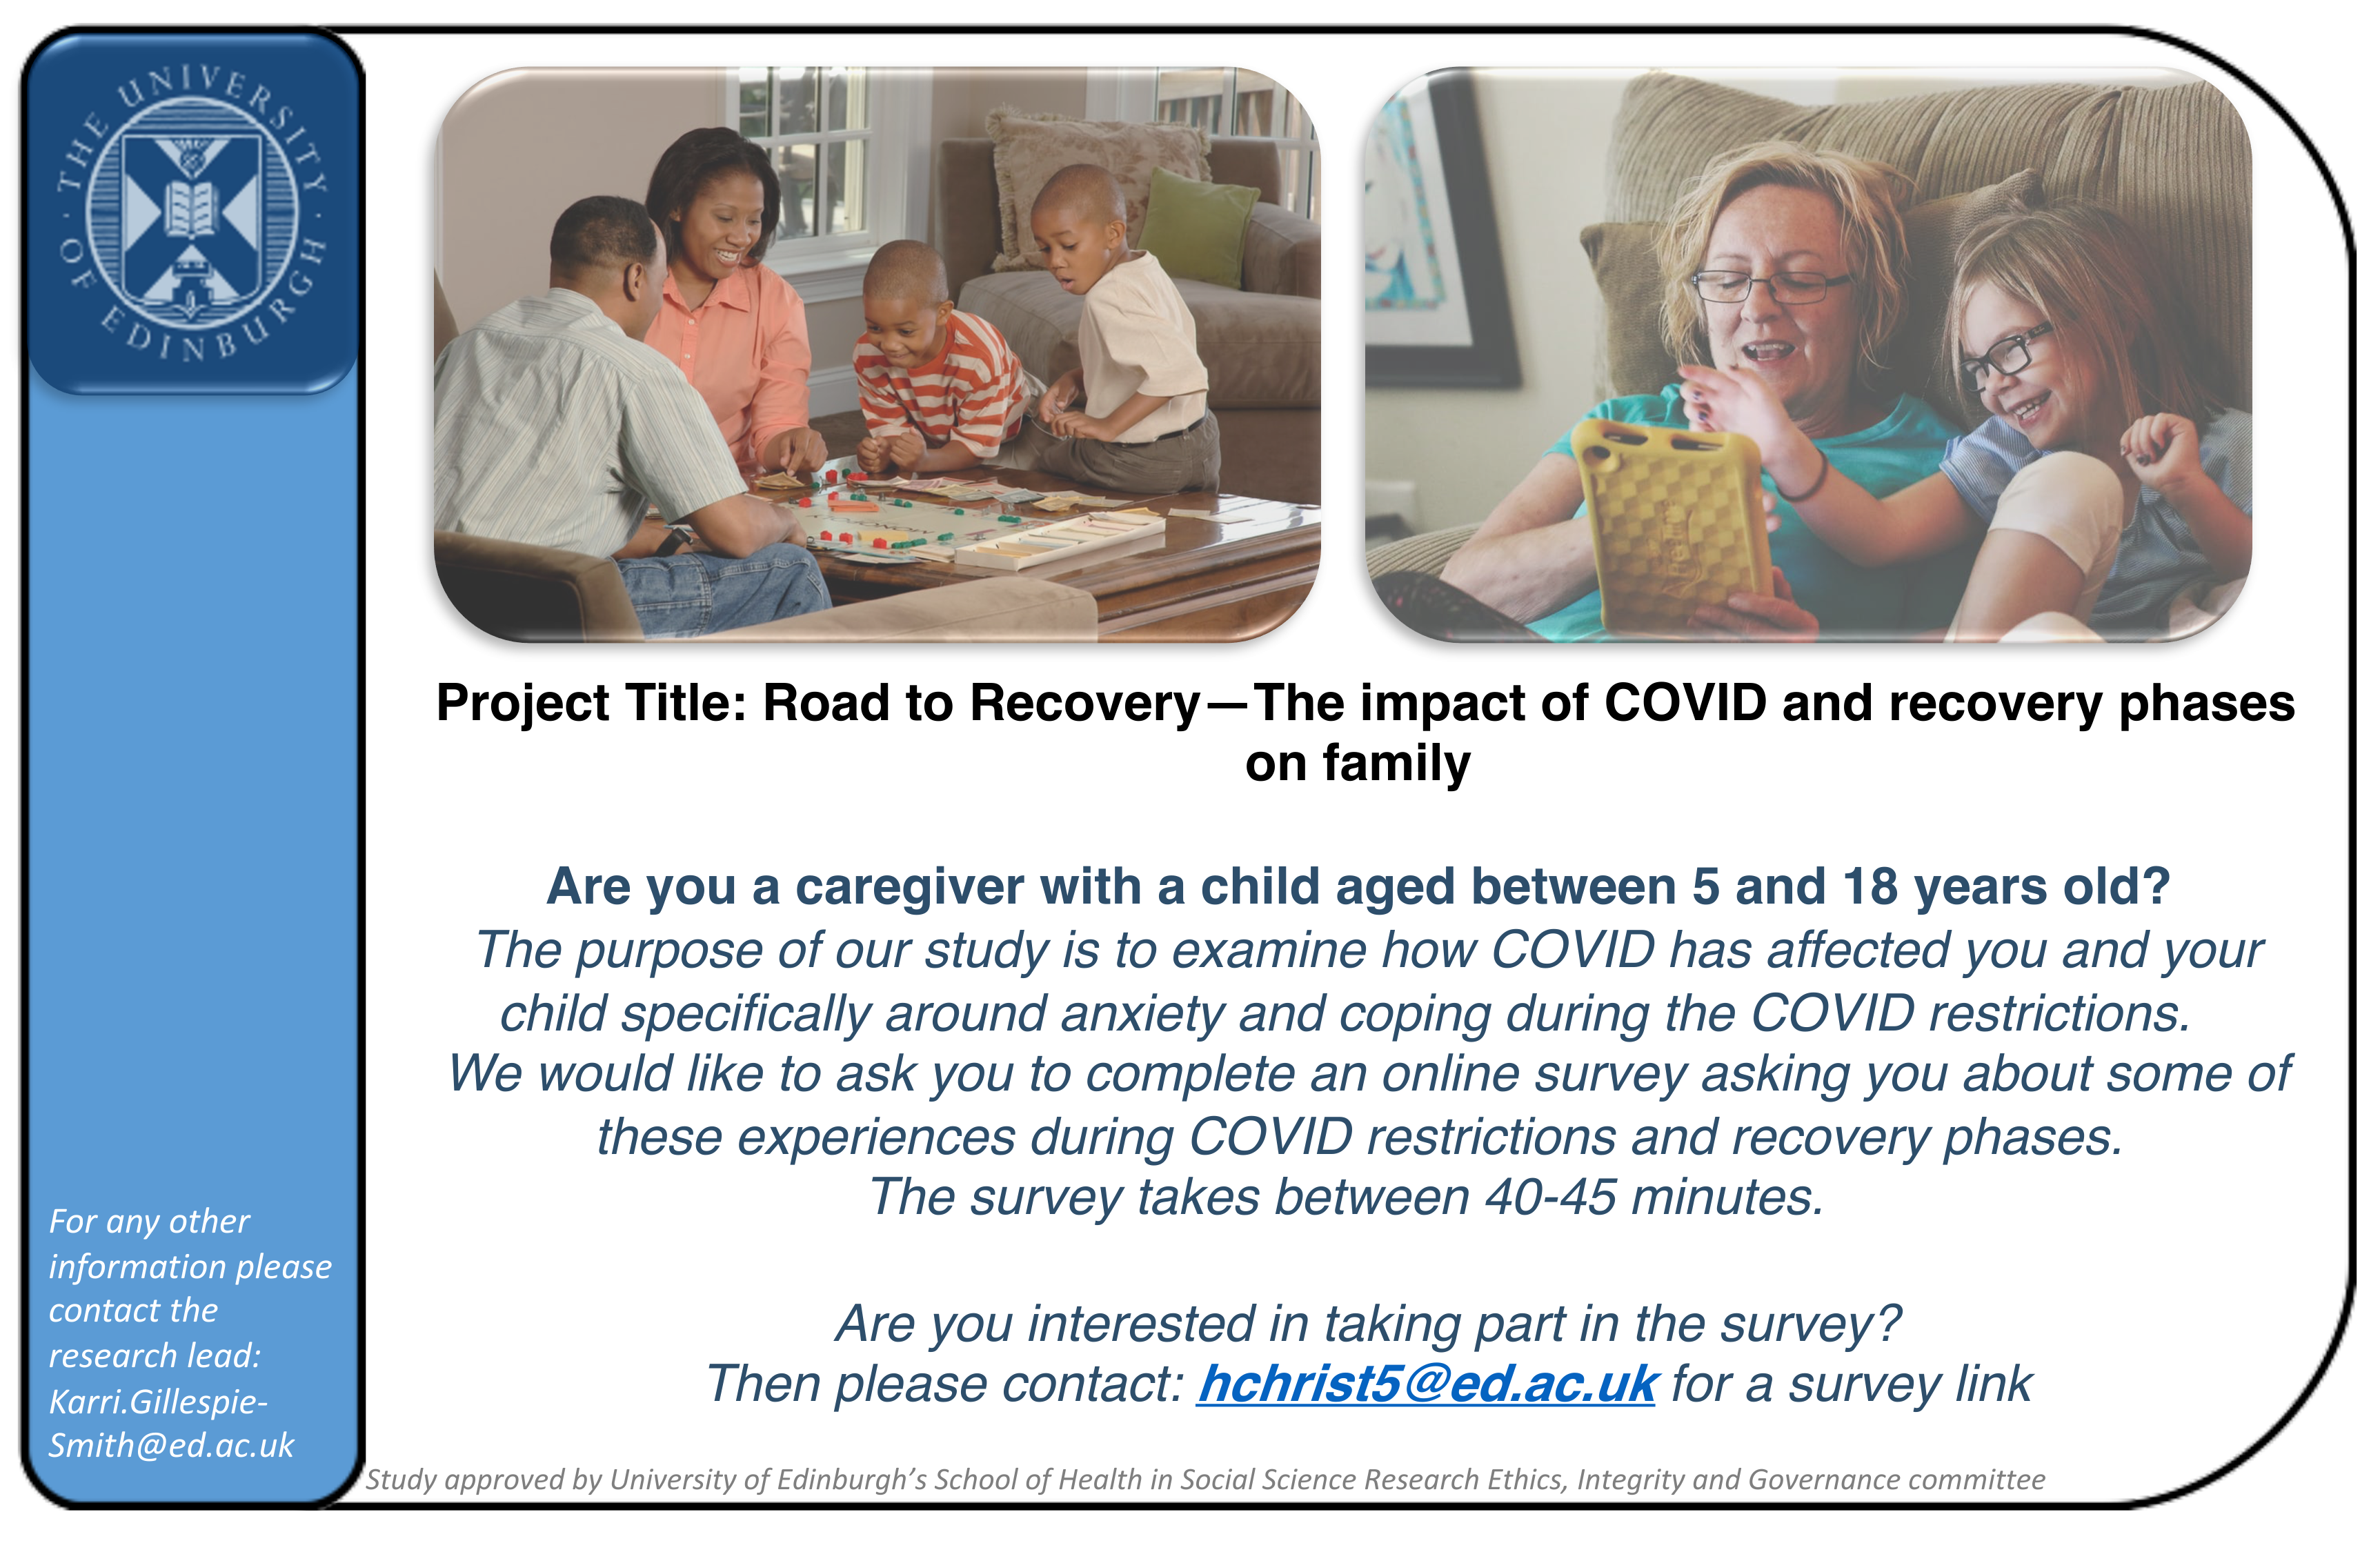 Project Title: Road to Recovery—The impact of COVID and recovery phases on family Are you a caregiver with a child aged between 5 and 18 years old? The purpose of our study is to examine how COVID has affected you and your child specifically around anxiety and coping during the COVID restrictions. We would like to ask you to complete an online survey asking you about some of these experiences during COVID restrictions and recovery phases. The survey takes between 40-45 minutes. Are you interested in taking part in the survey? Then please contact: hchrist5@ed.ac.uk for a survey link